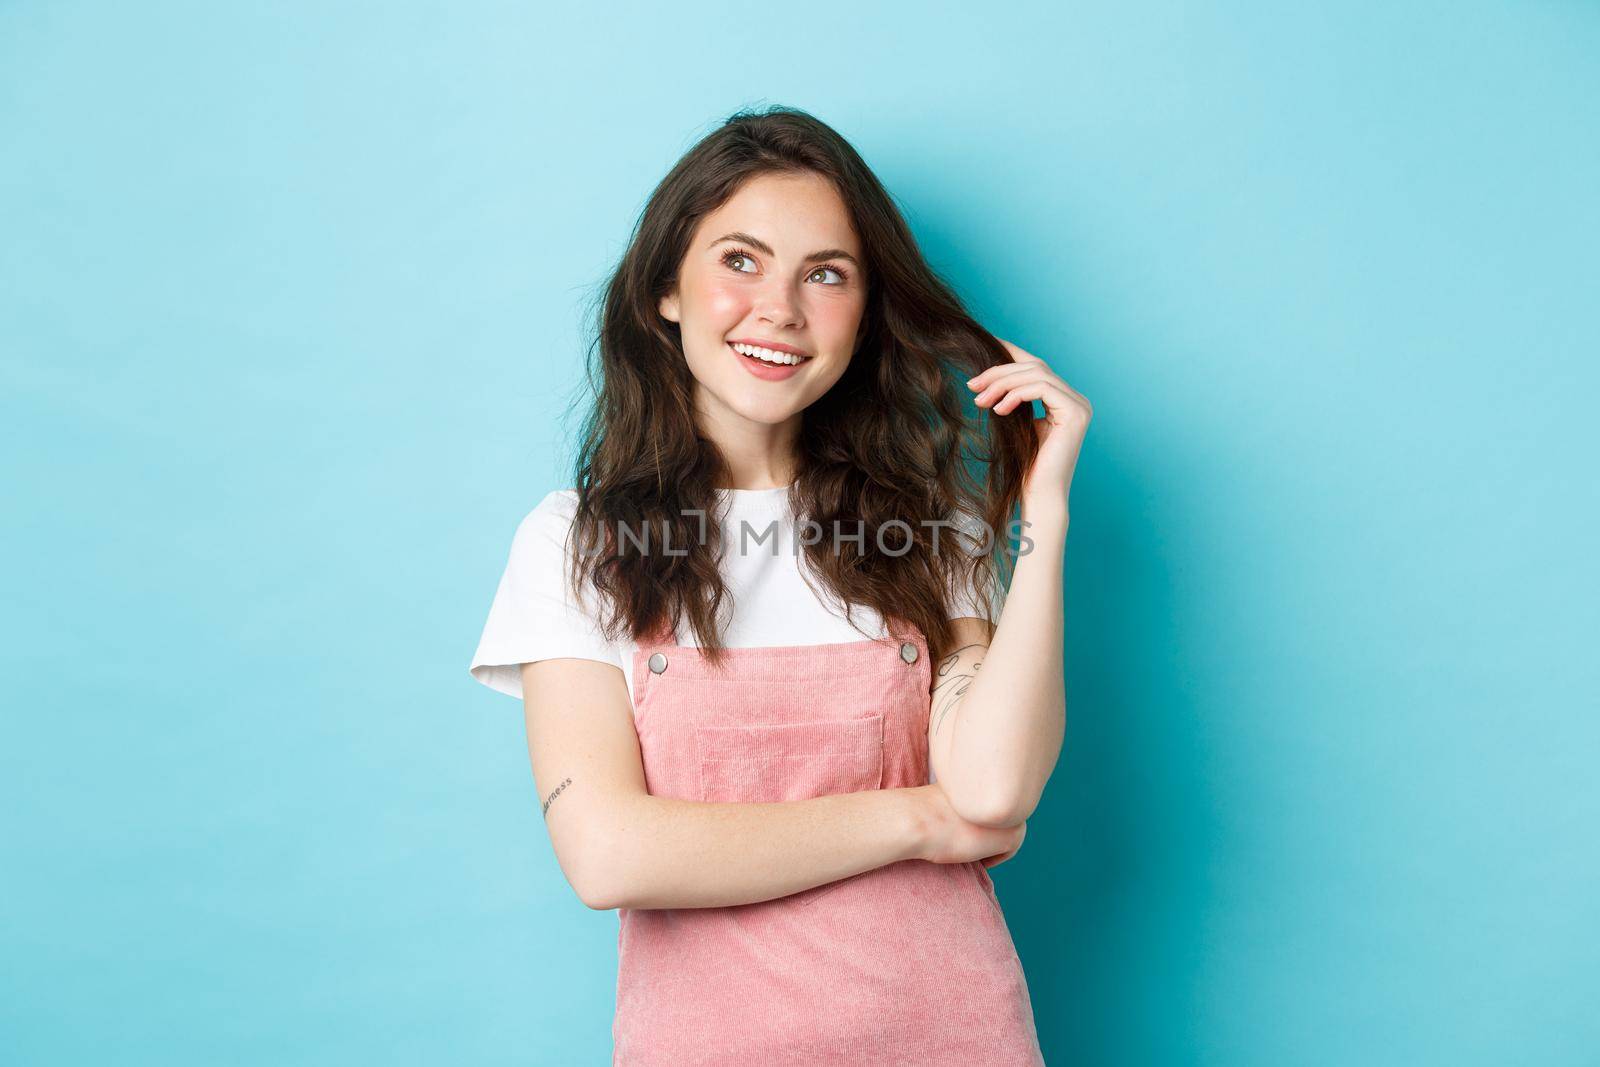 Young girl looking dreamy and playing with glowing curly hair, smiling pensive, imaging summer holidays or shopping, standing against blue background.